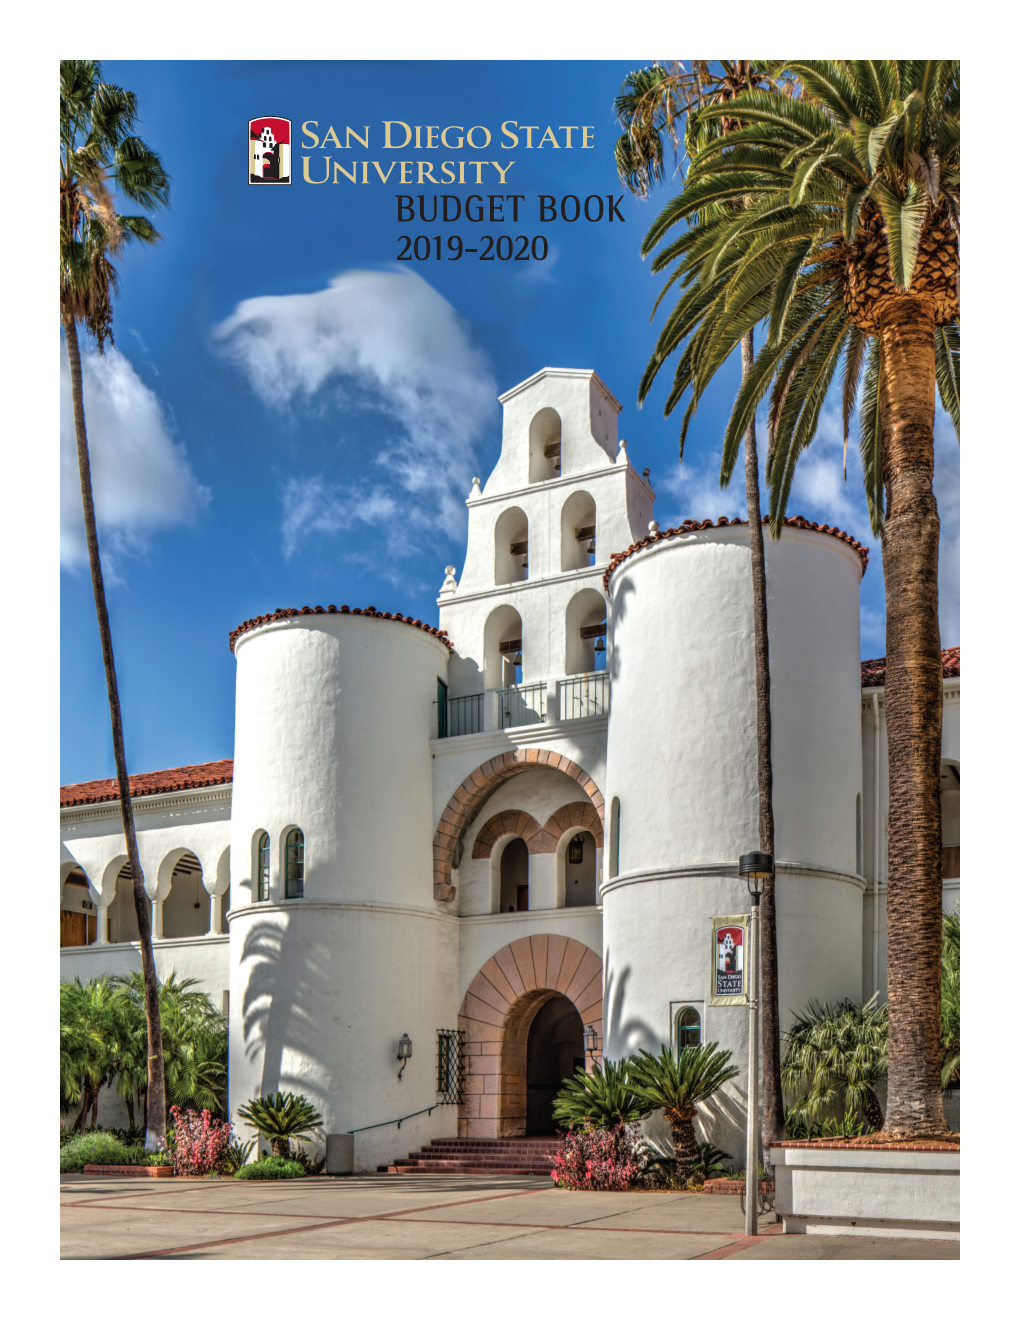 BUDGET BOOK 2019-2020 San Diego State University 2019/2020 Budget Table of Contents